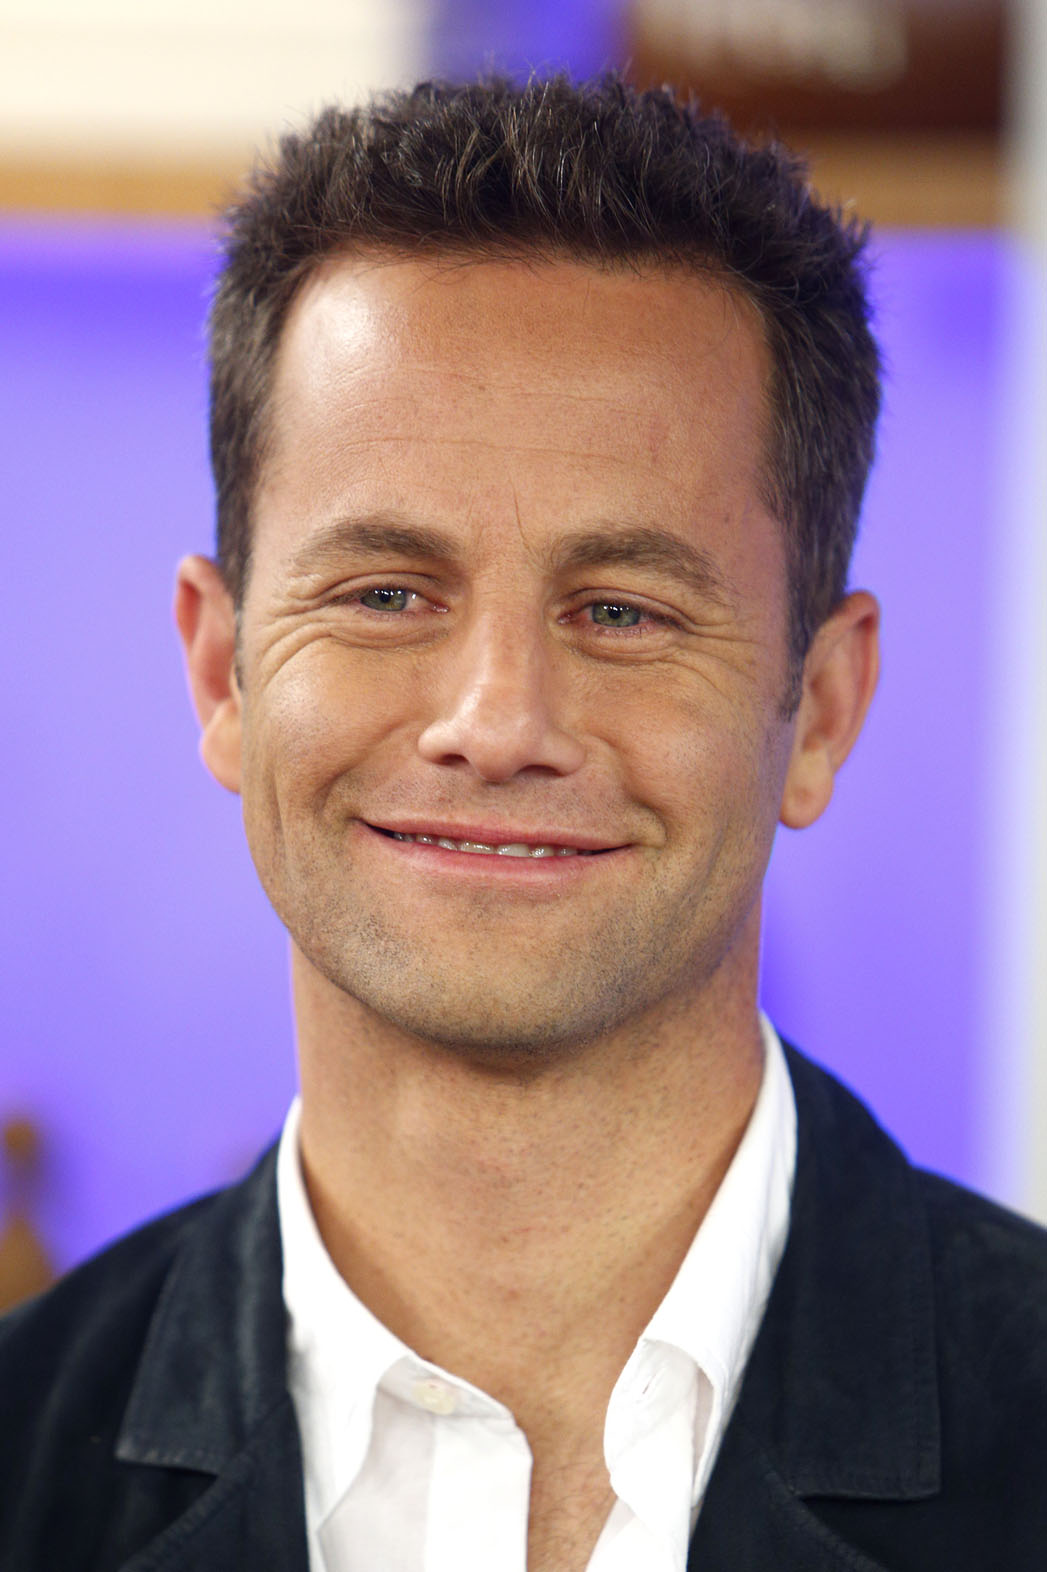 The 51-year old son of father (?) and mother(?) Kirk Cameron in 2022 photo. Kirk Cameron earned a  million dollar salary - leaving the net worth at  million in 2022